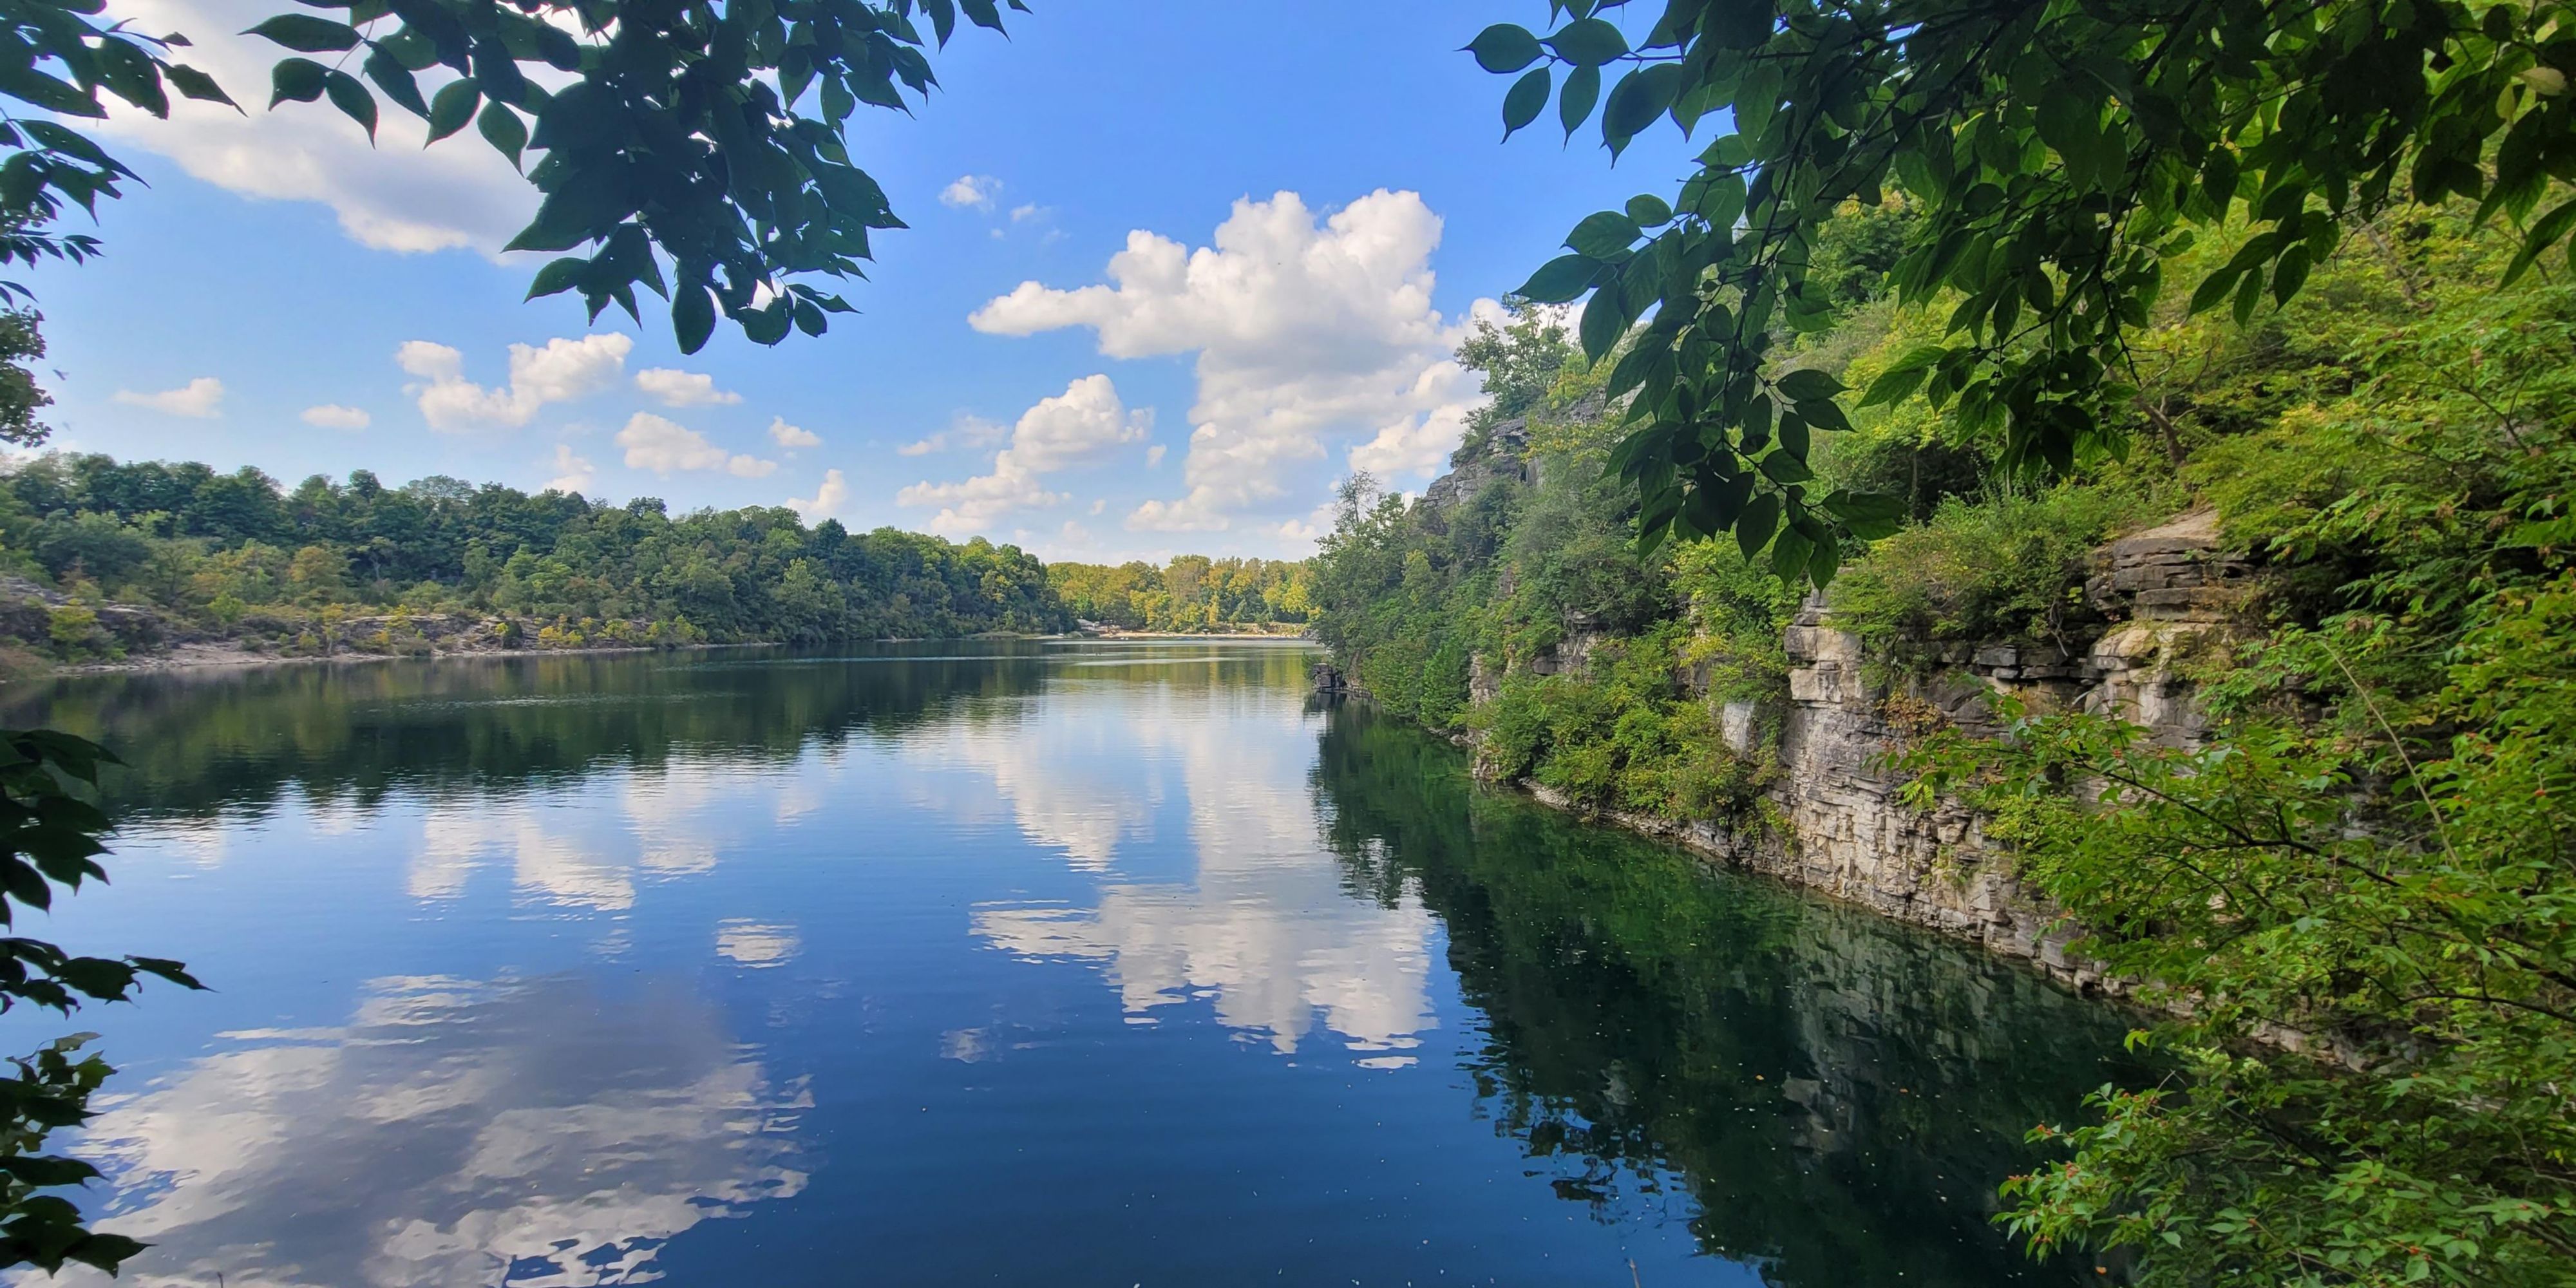 Logansport is beautiful. Take a relaxing hike around the old quarry at France Park or visit another one of our many parks dotted throughout the city!